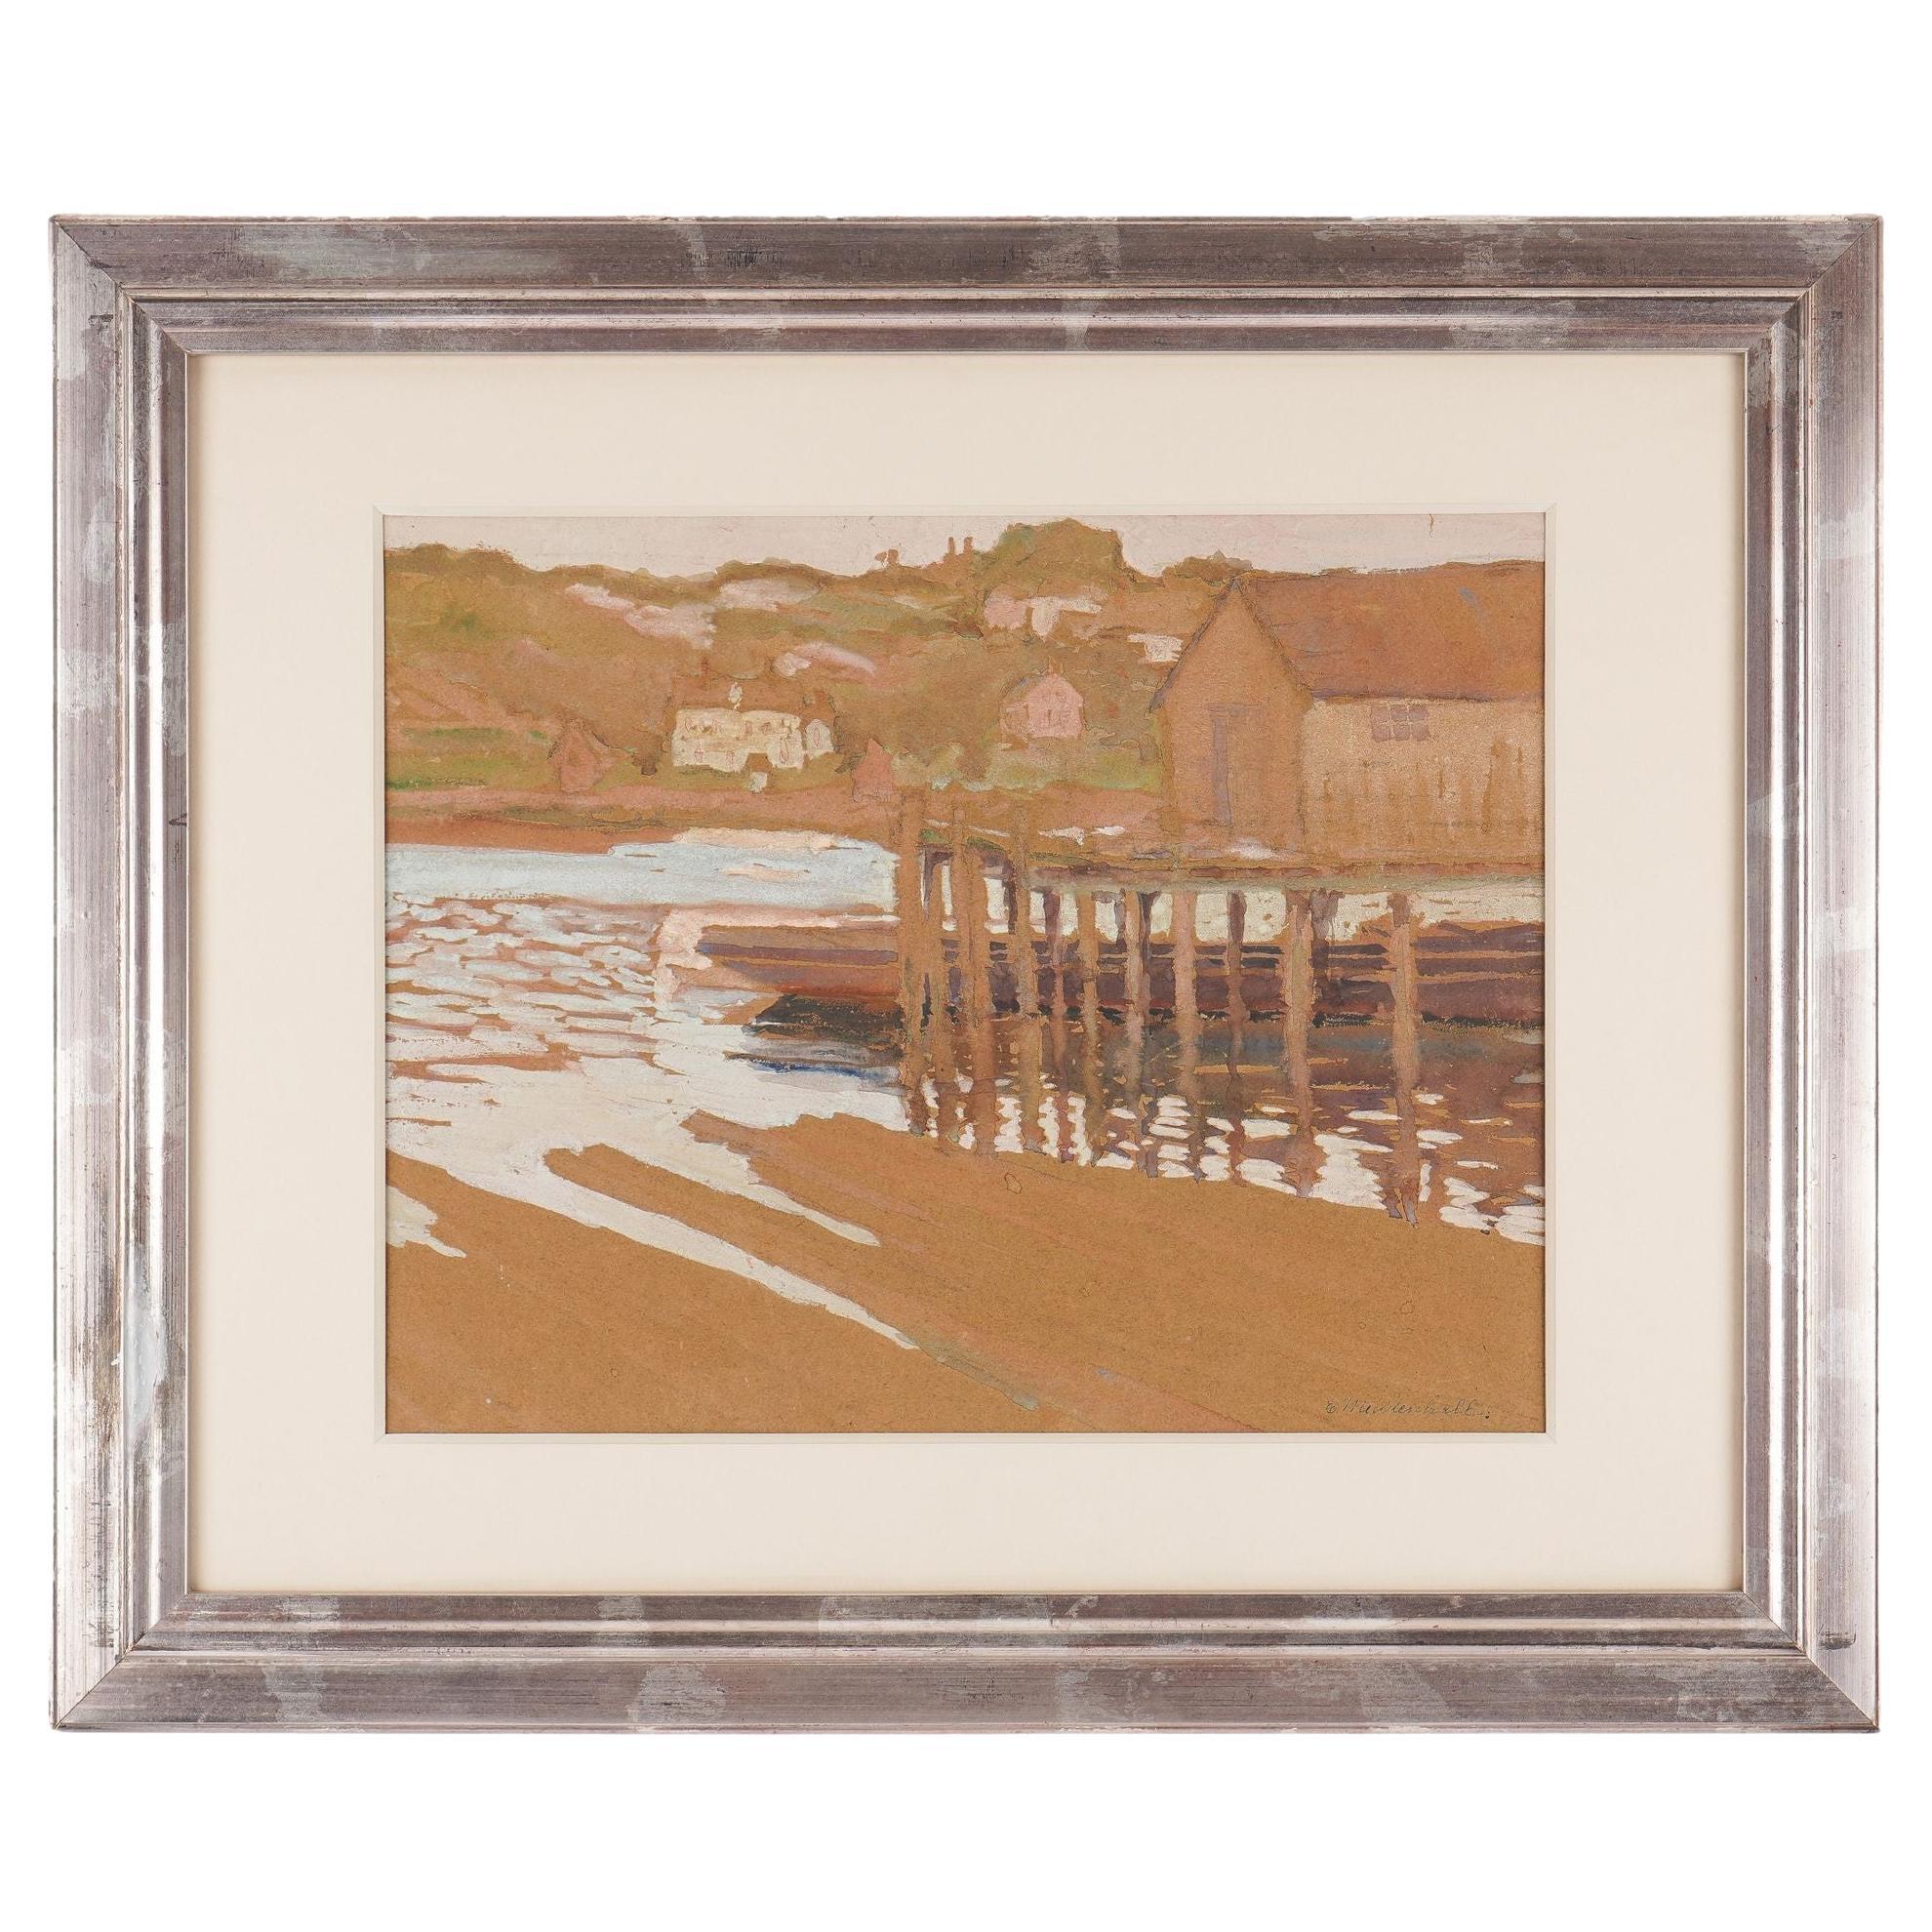 View of the piers in Rockport, Massachusetts by Emma Mendenhall, c. 1910